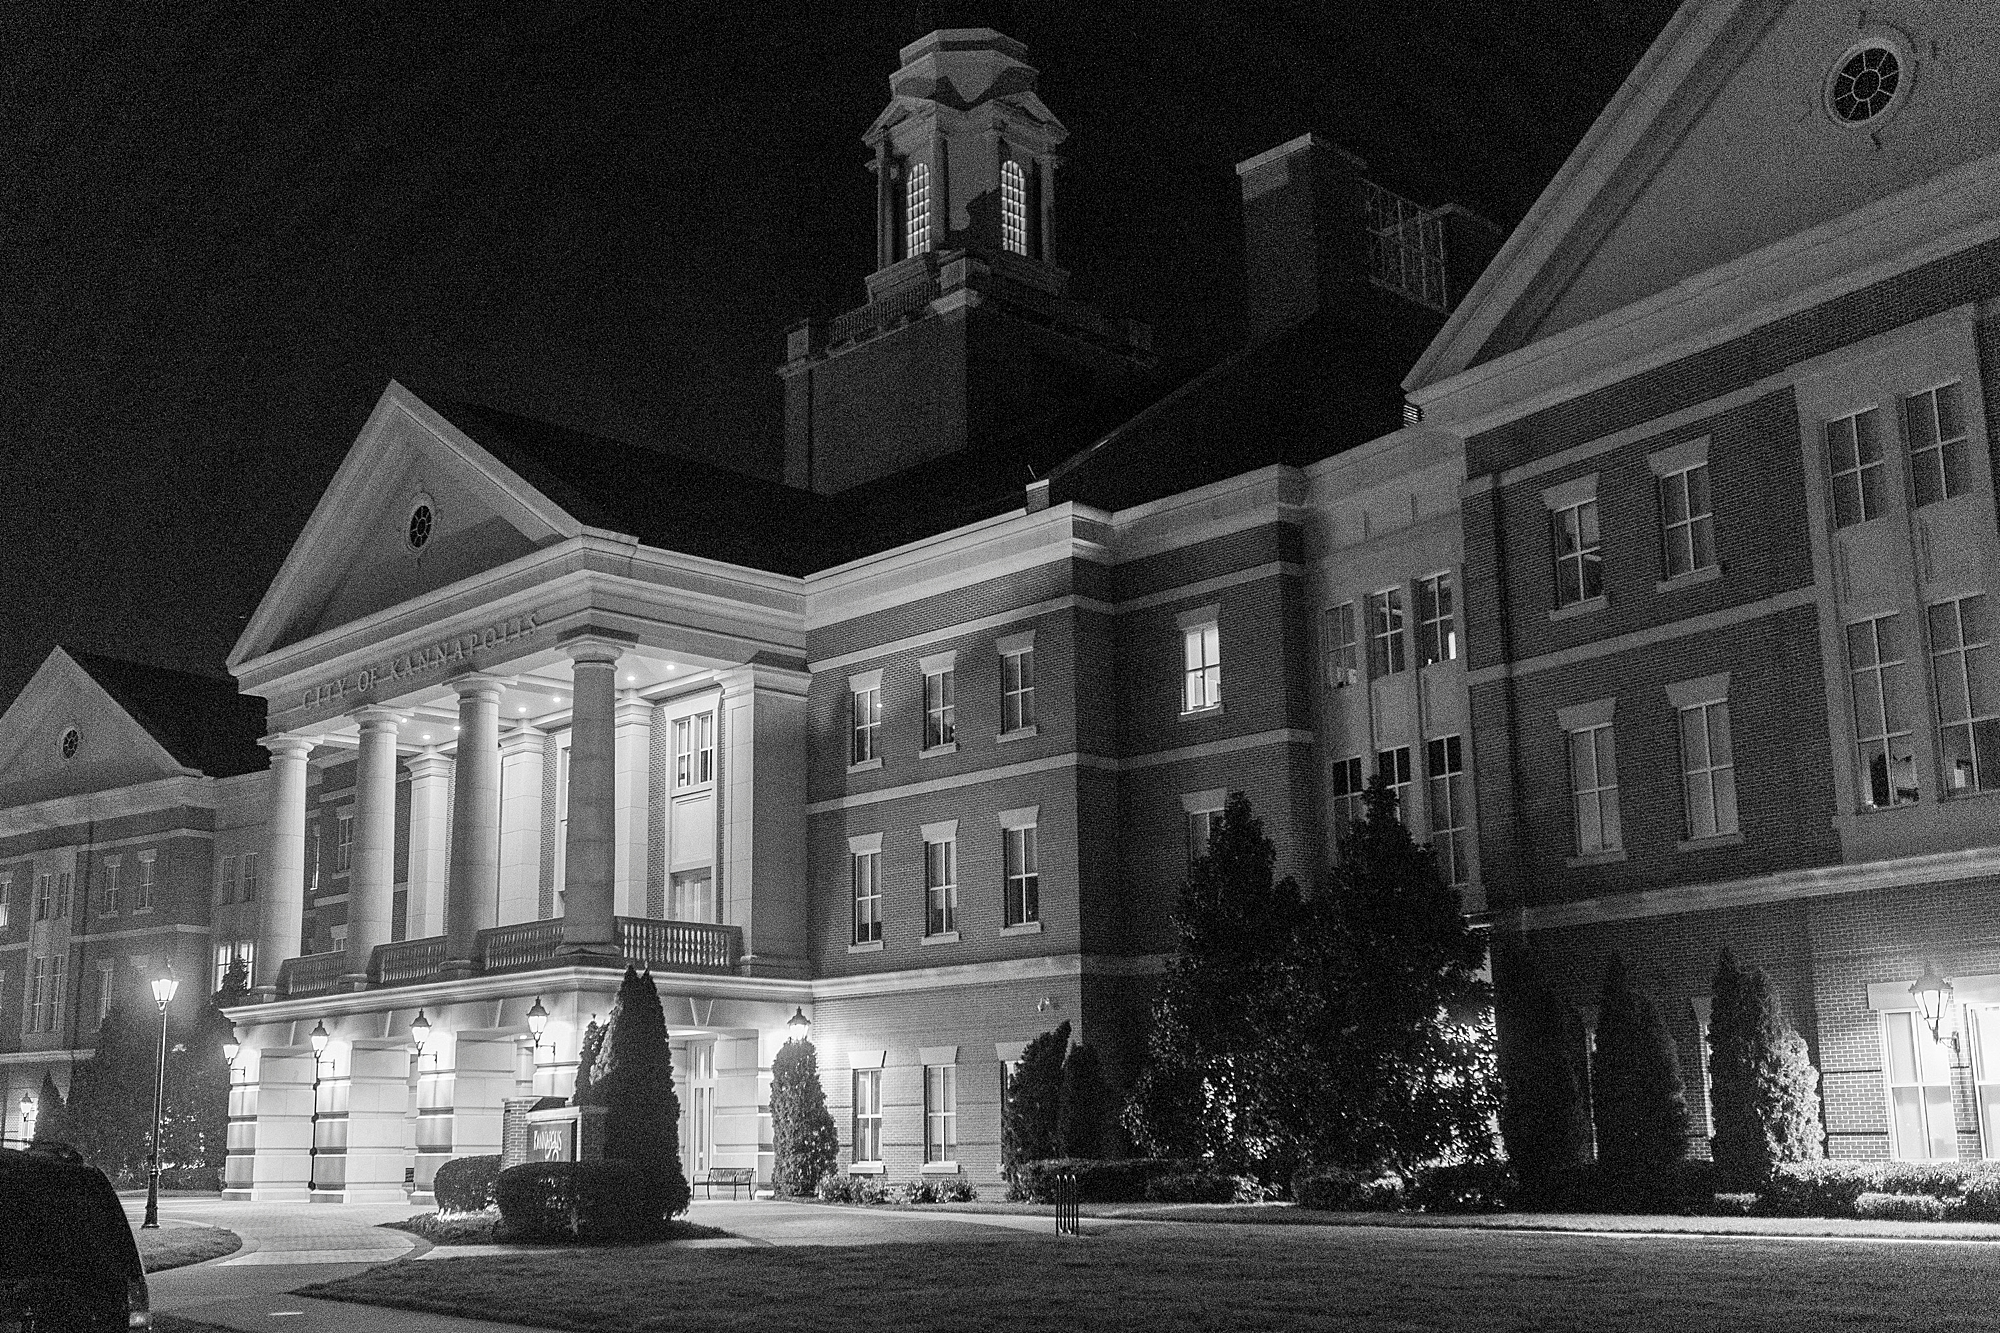 nighttime portrait of building in Downtown Kannapolis